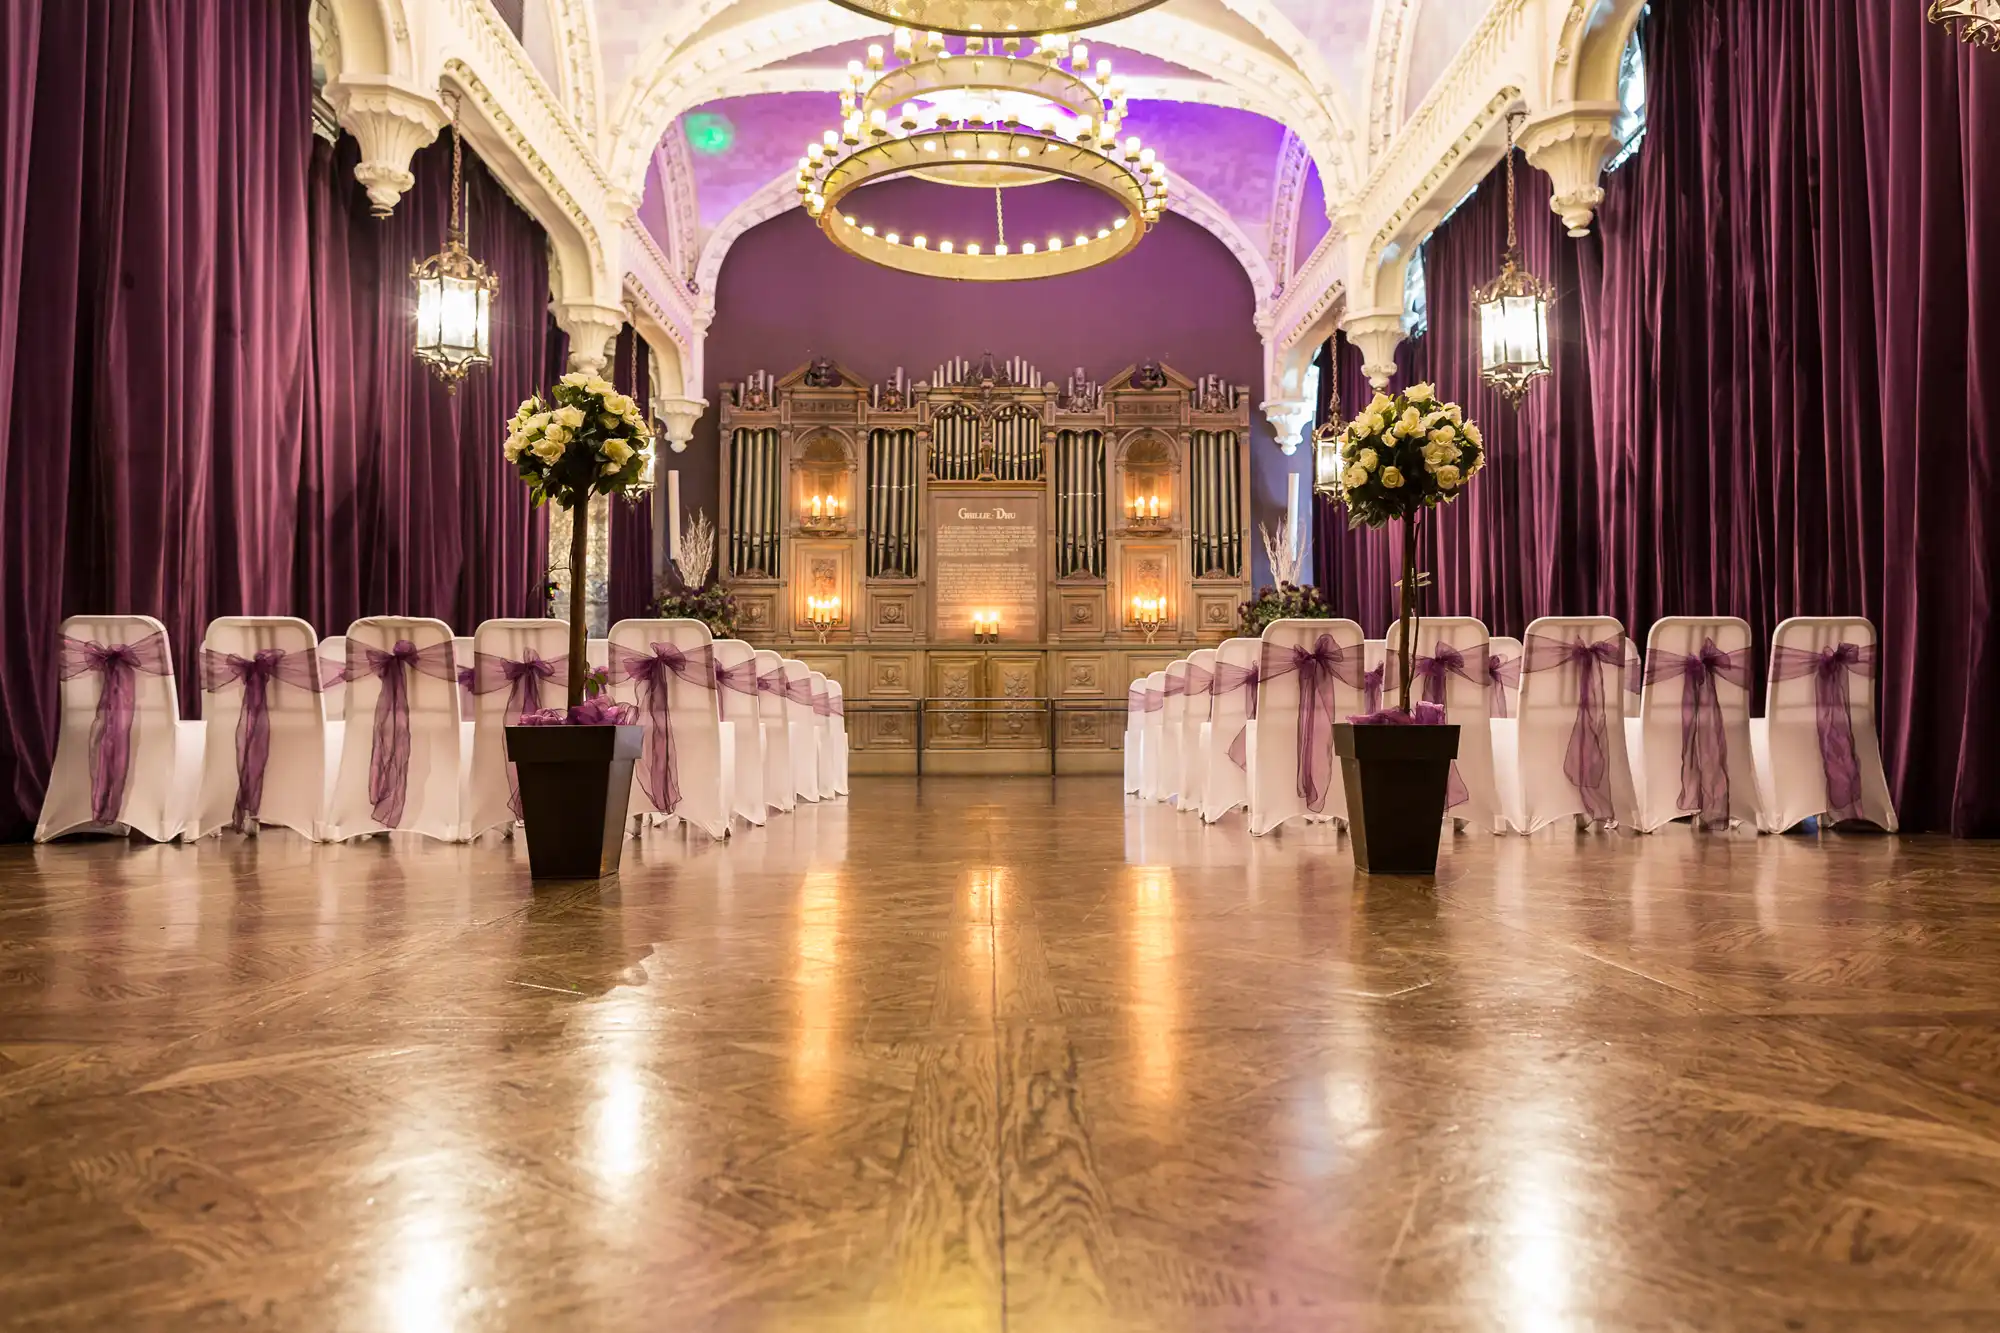 Elegant wedding venue interior with a purple color scheme, white chairs covered with purple ribbons, floral decorations, and a grand chandelier.